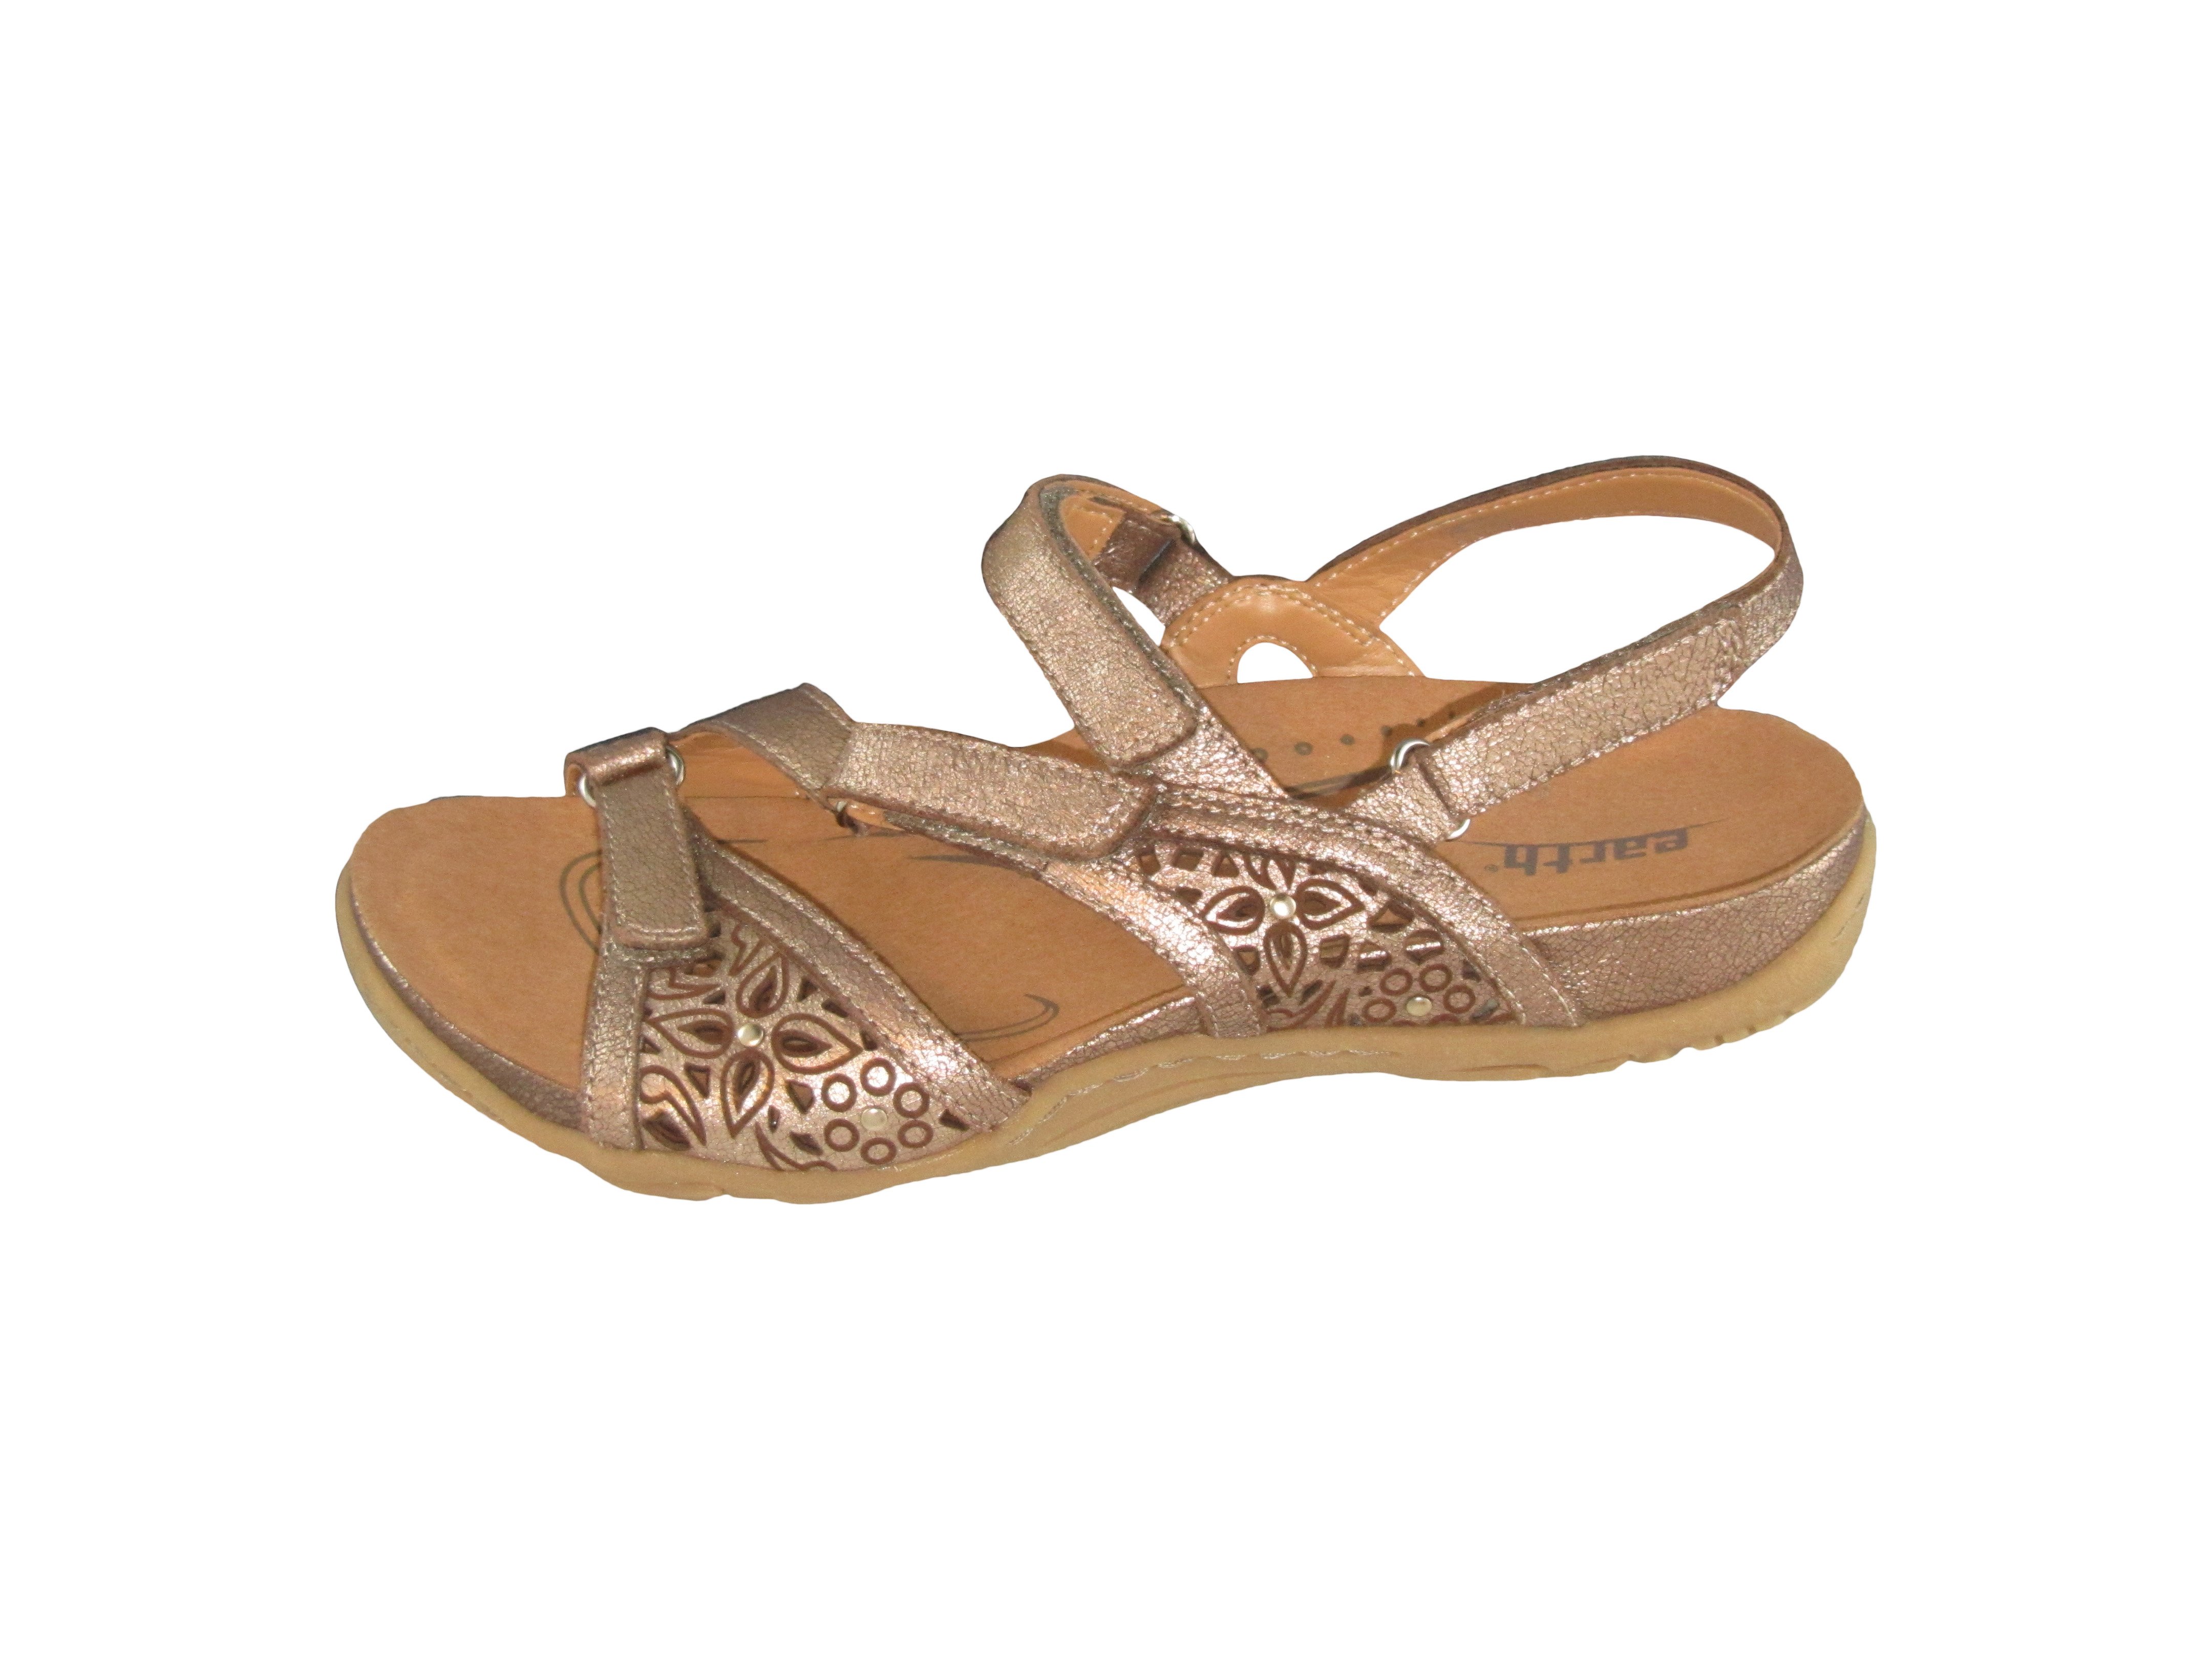 MAUI EARTH - WOMENS SHOES-SANDALS - low to flat : Shirley's Shoes ...